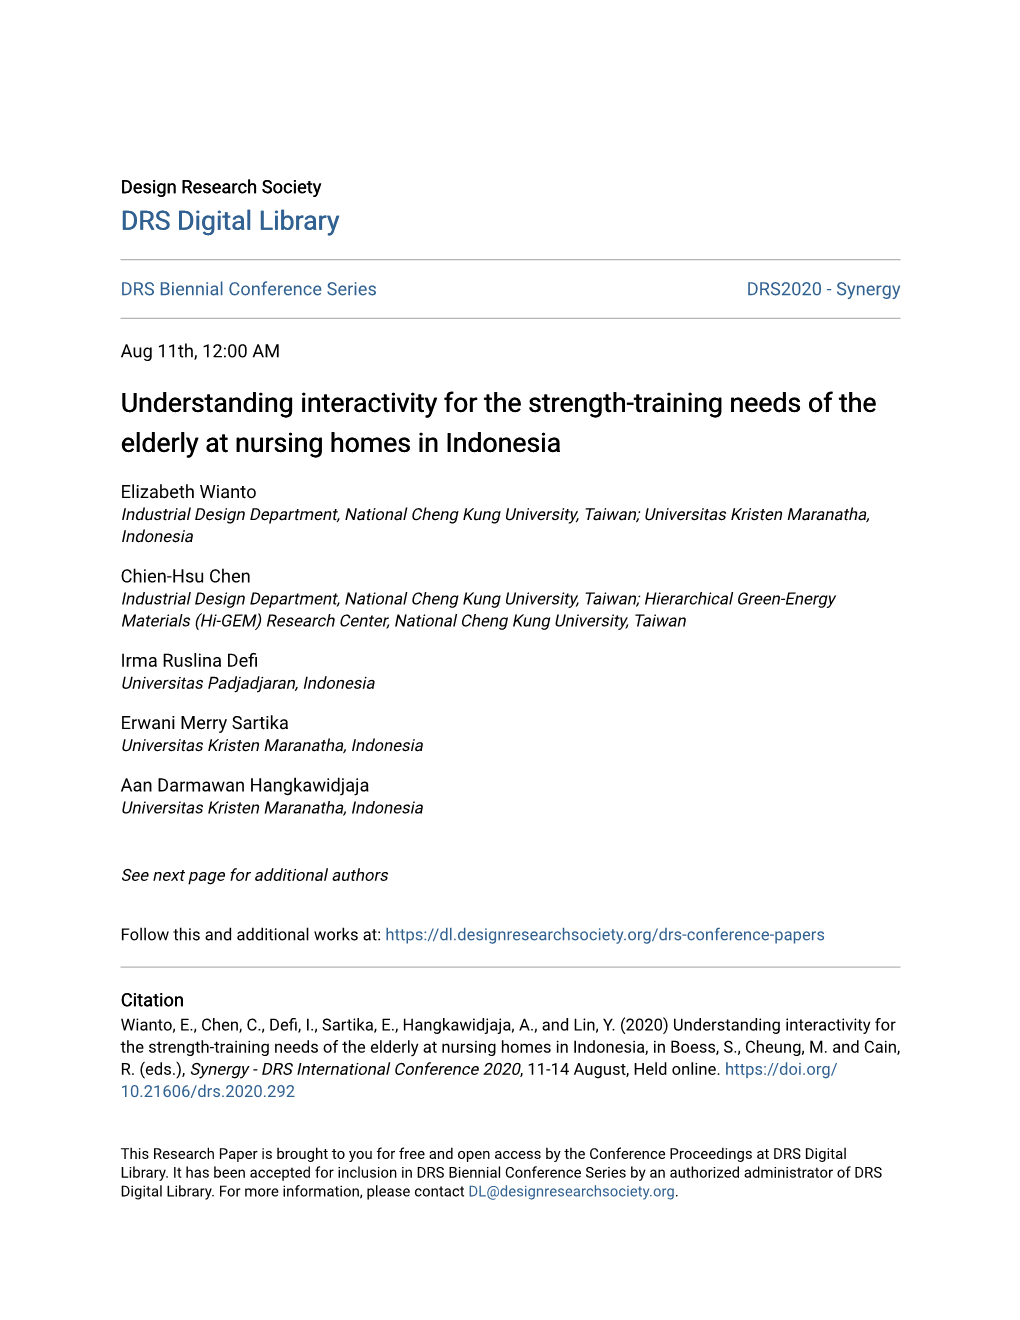 Understanding Interactivity for the Strength Training Needs of the Elderly at Nursing Homes in Indonesia